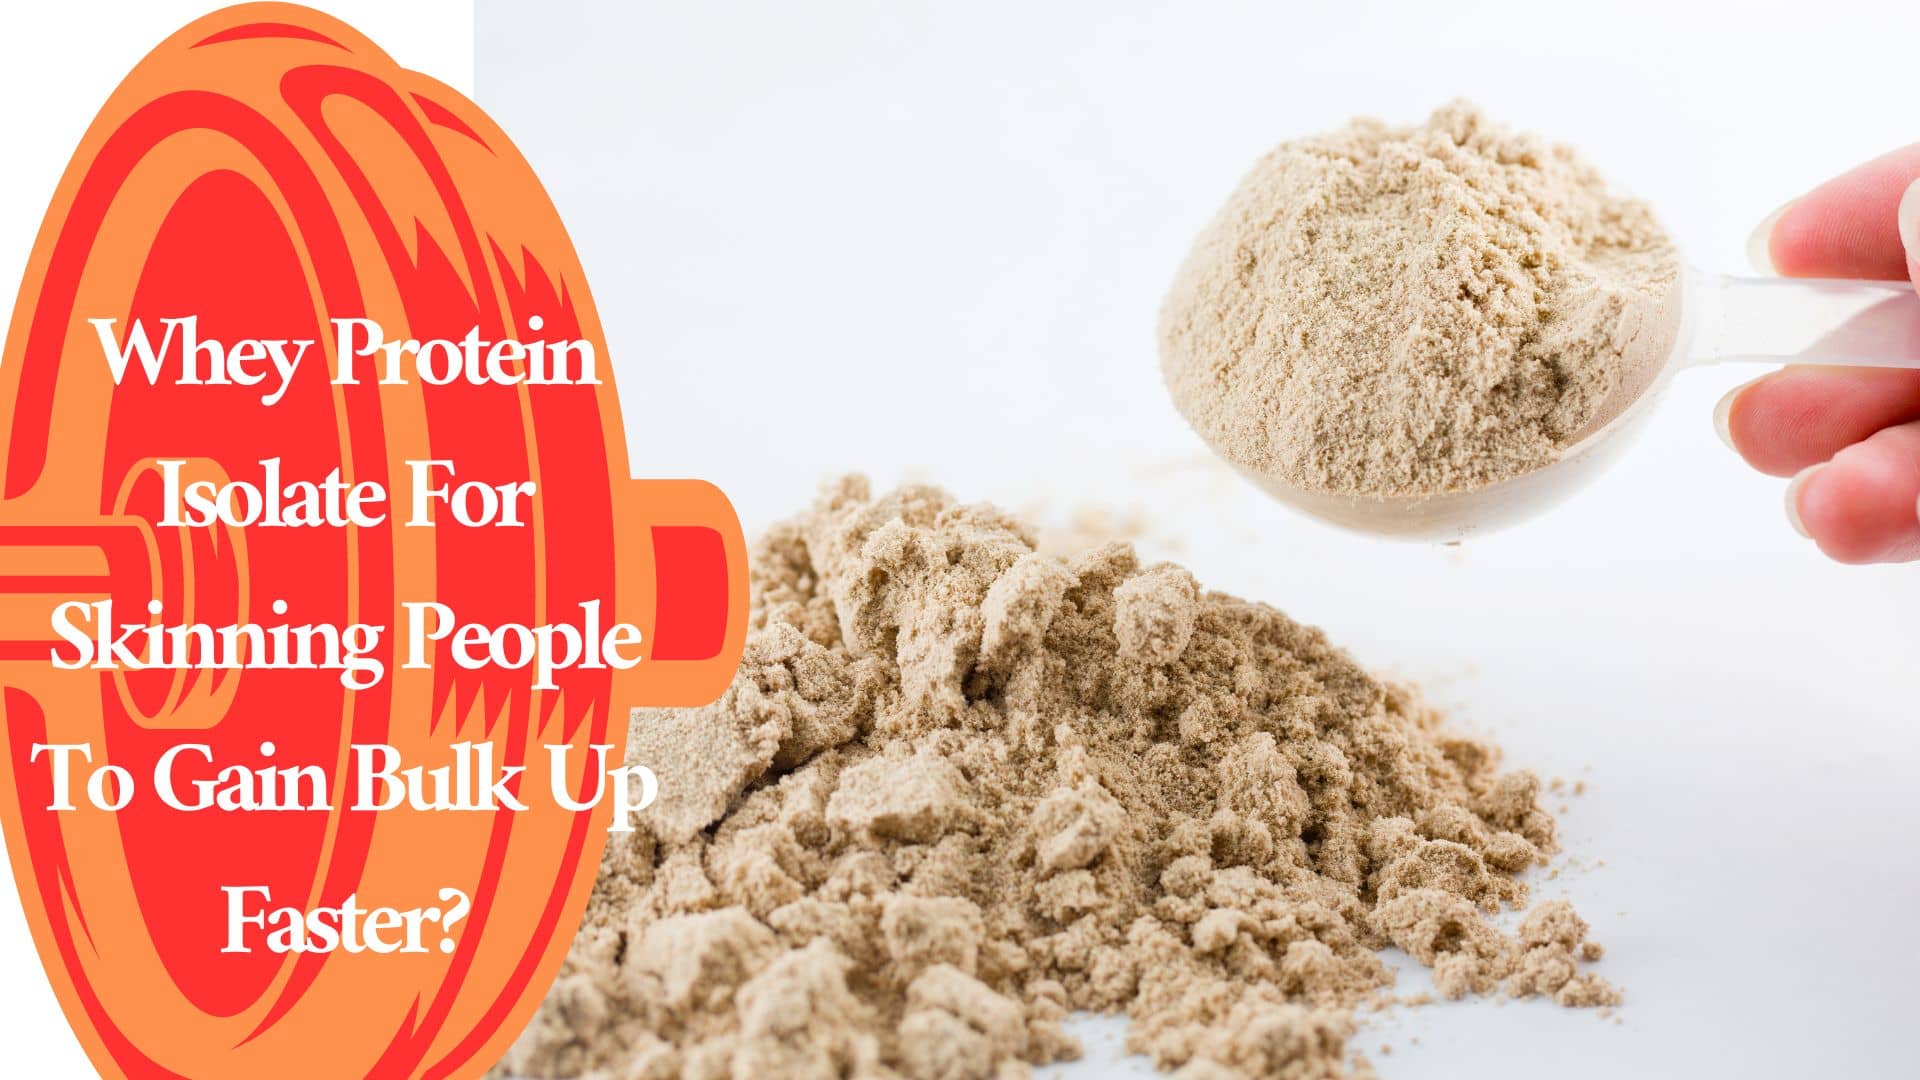 Whey Protein Isolate For Skinning People To Gain Bulk Up Faster?